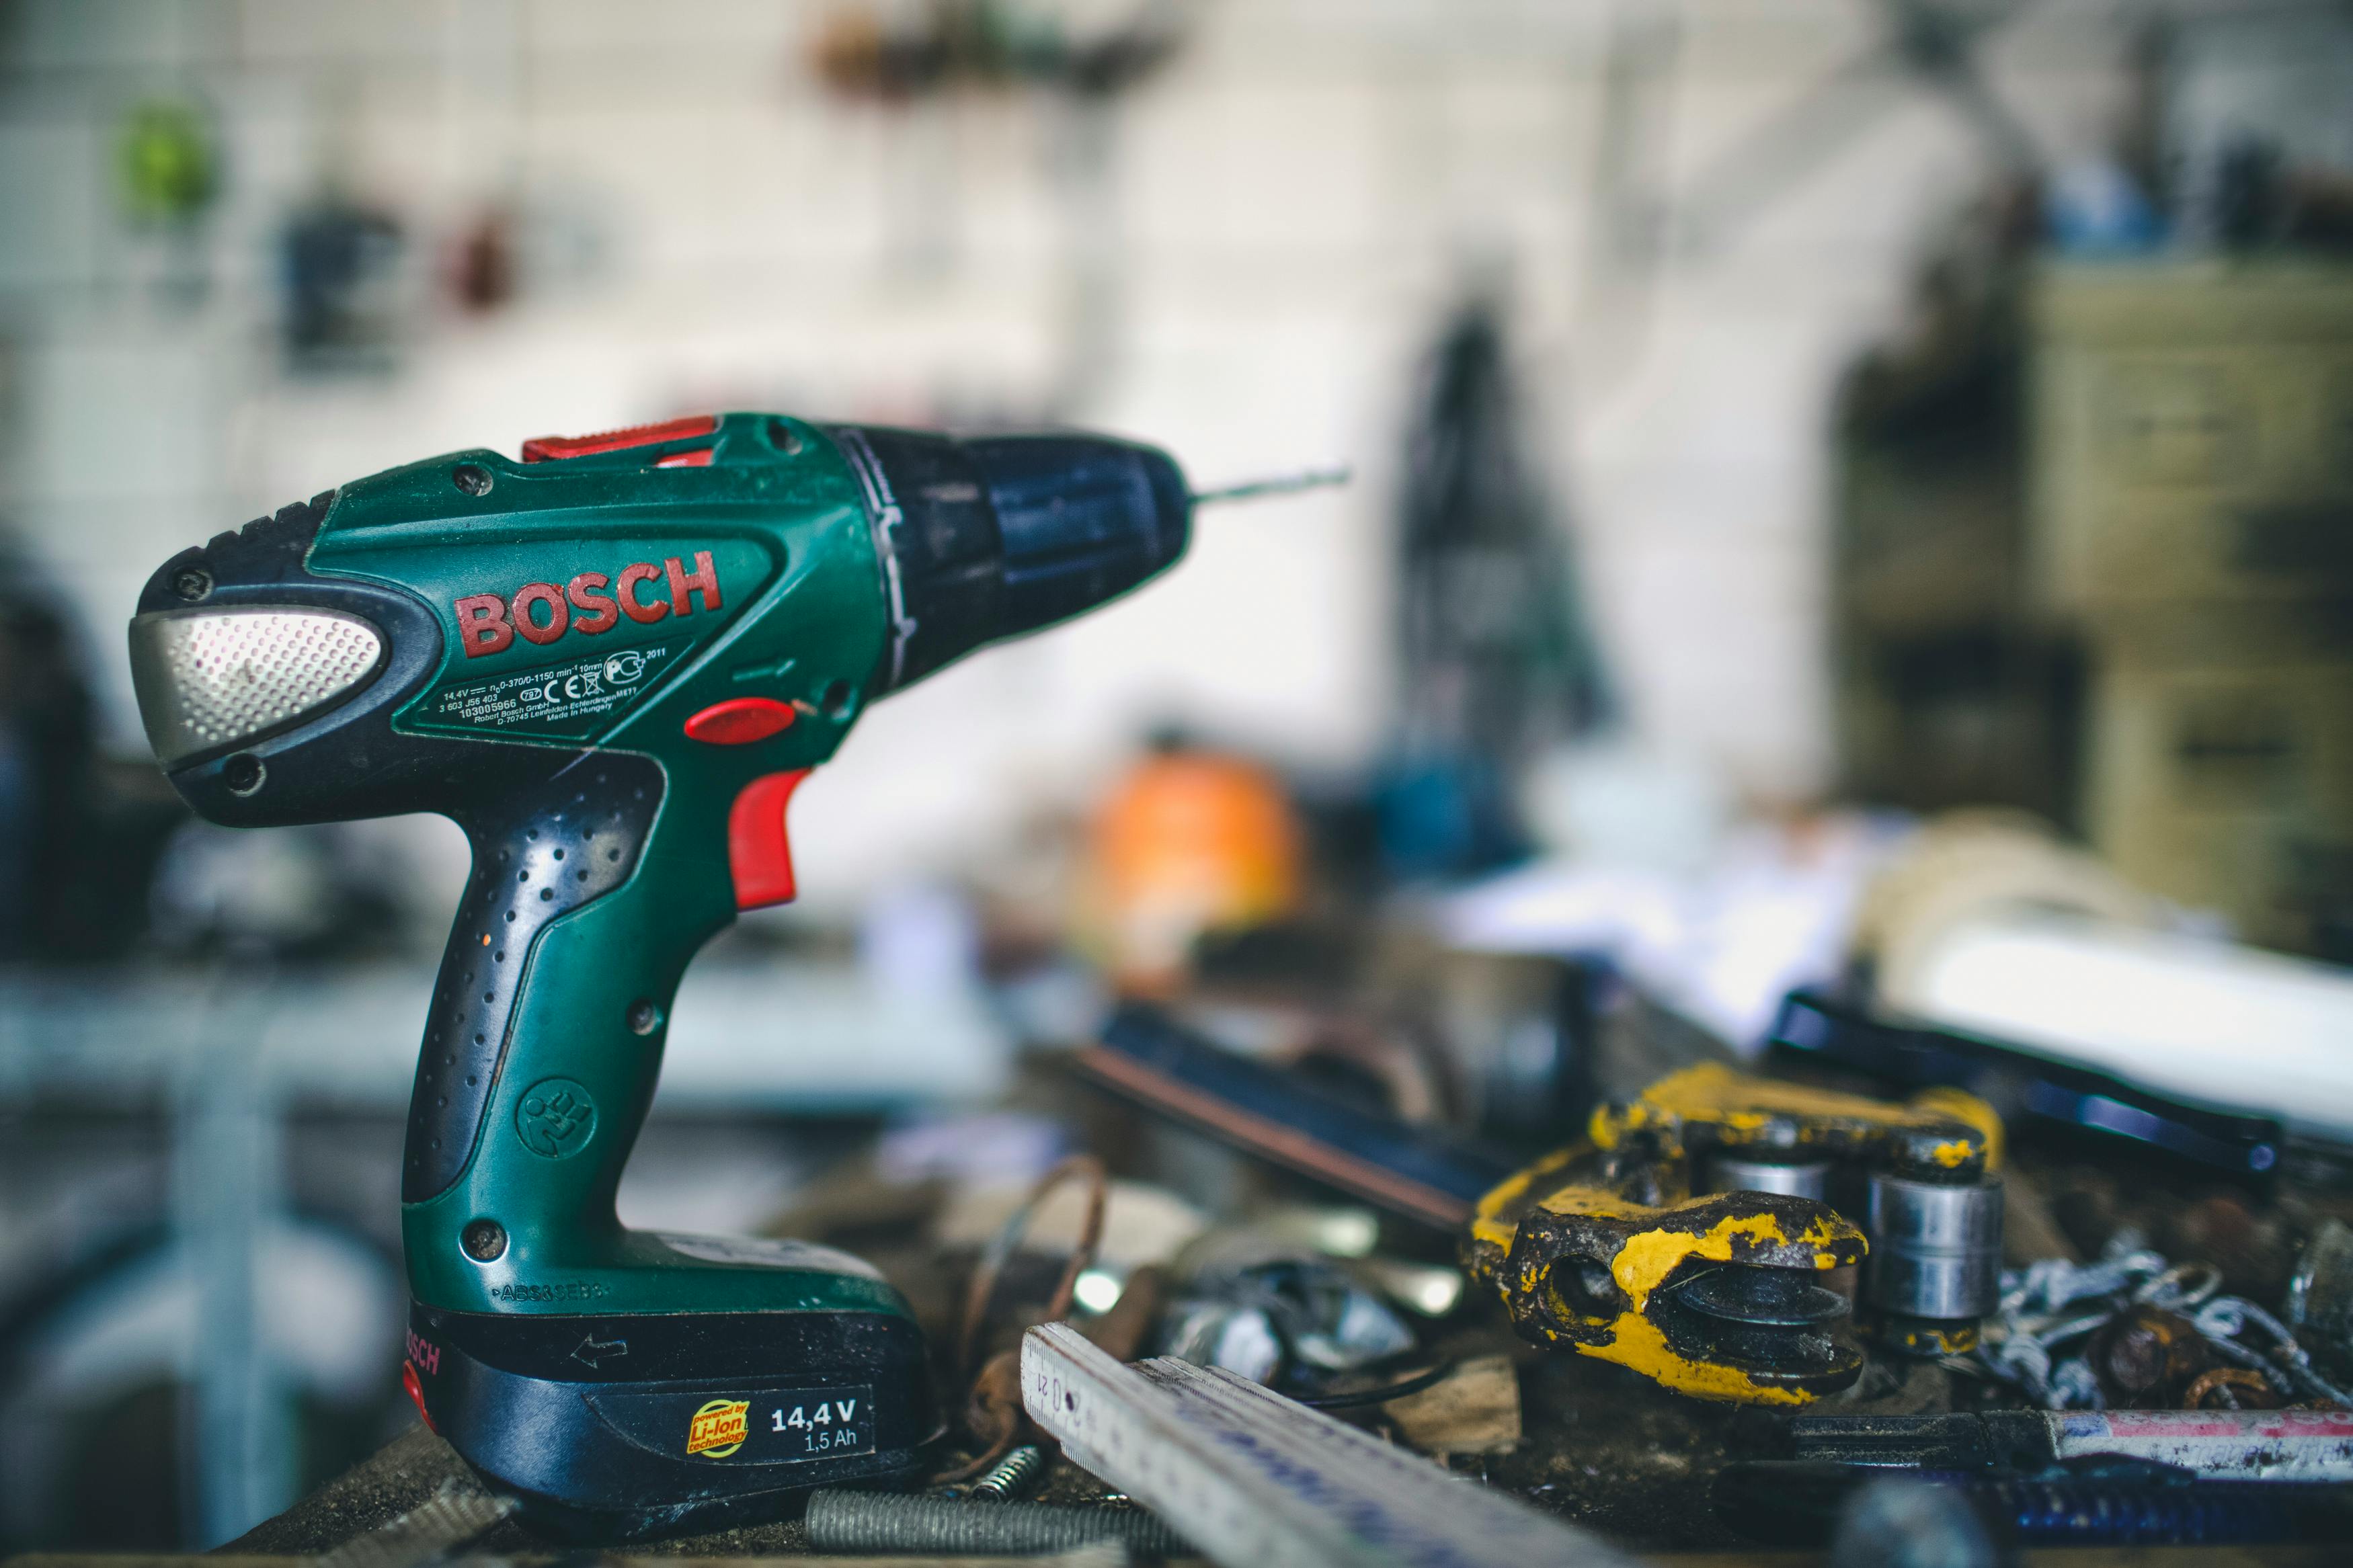 Teal And Black Bosch Cordless Hand Drill Free Stock Photo